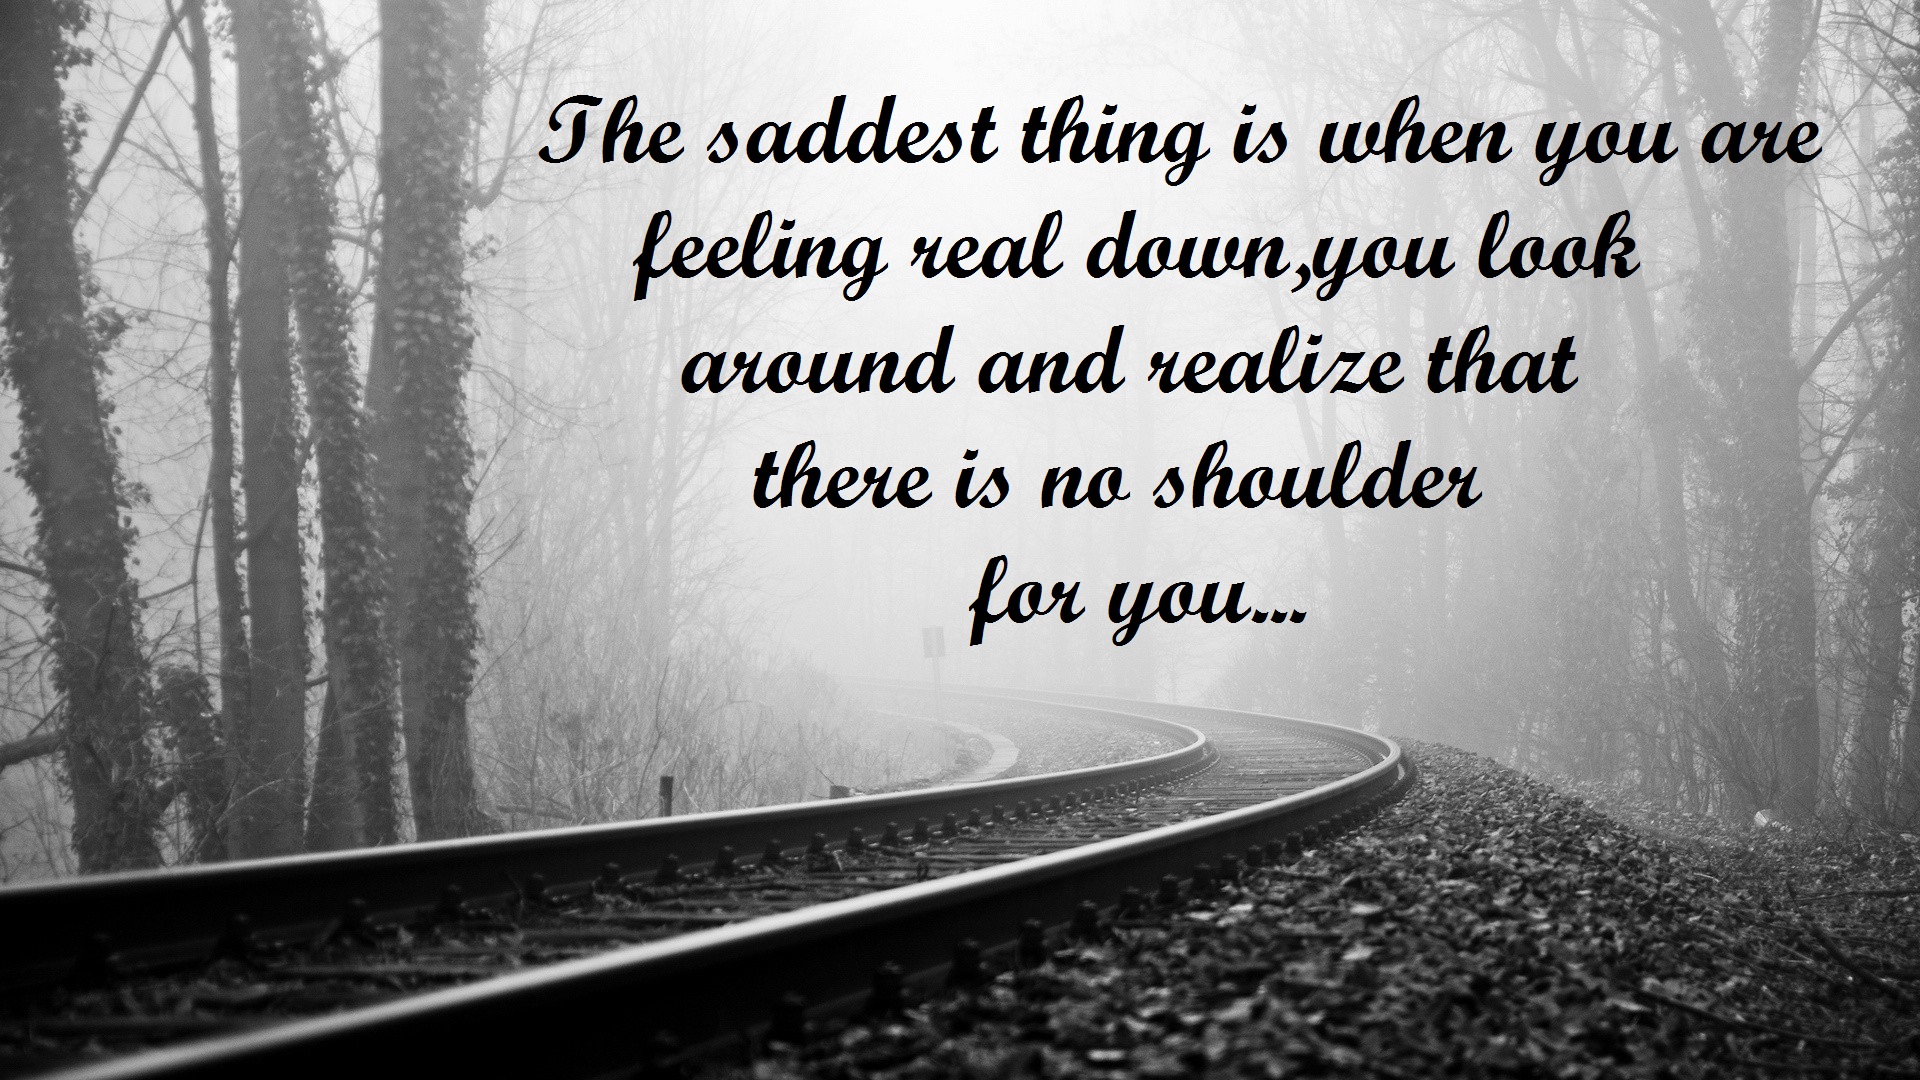 Sad Life Quotes Image - Heart Touching Sad Line Quotes - HD Wallpaper 